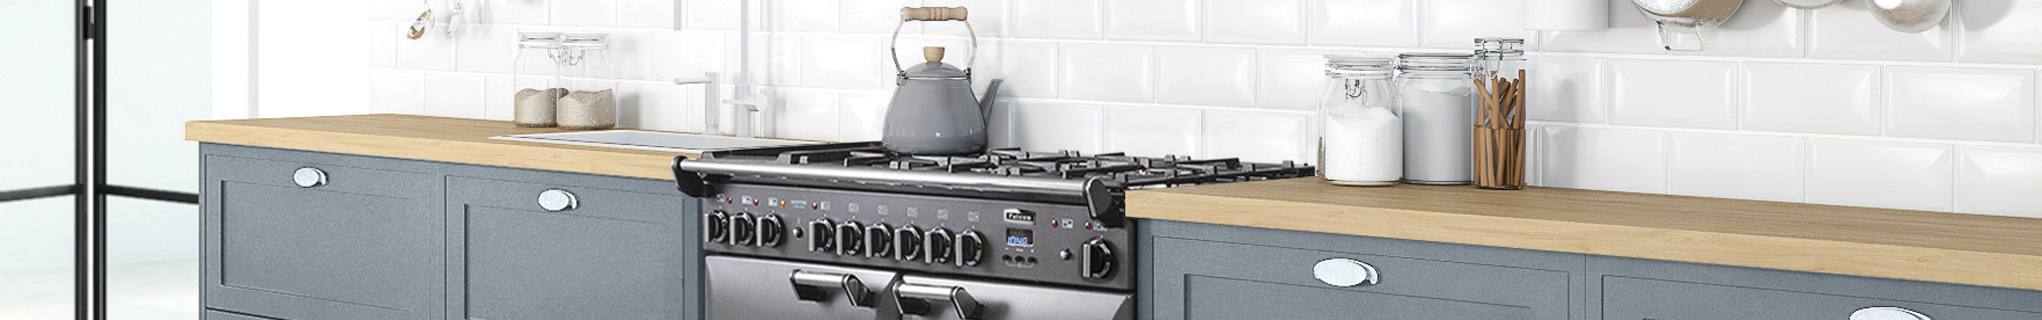 Falcon Leckford Deluxe 110 Dual Fuel in Slate